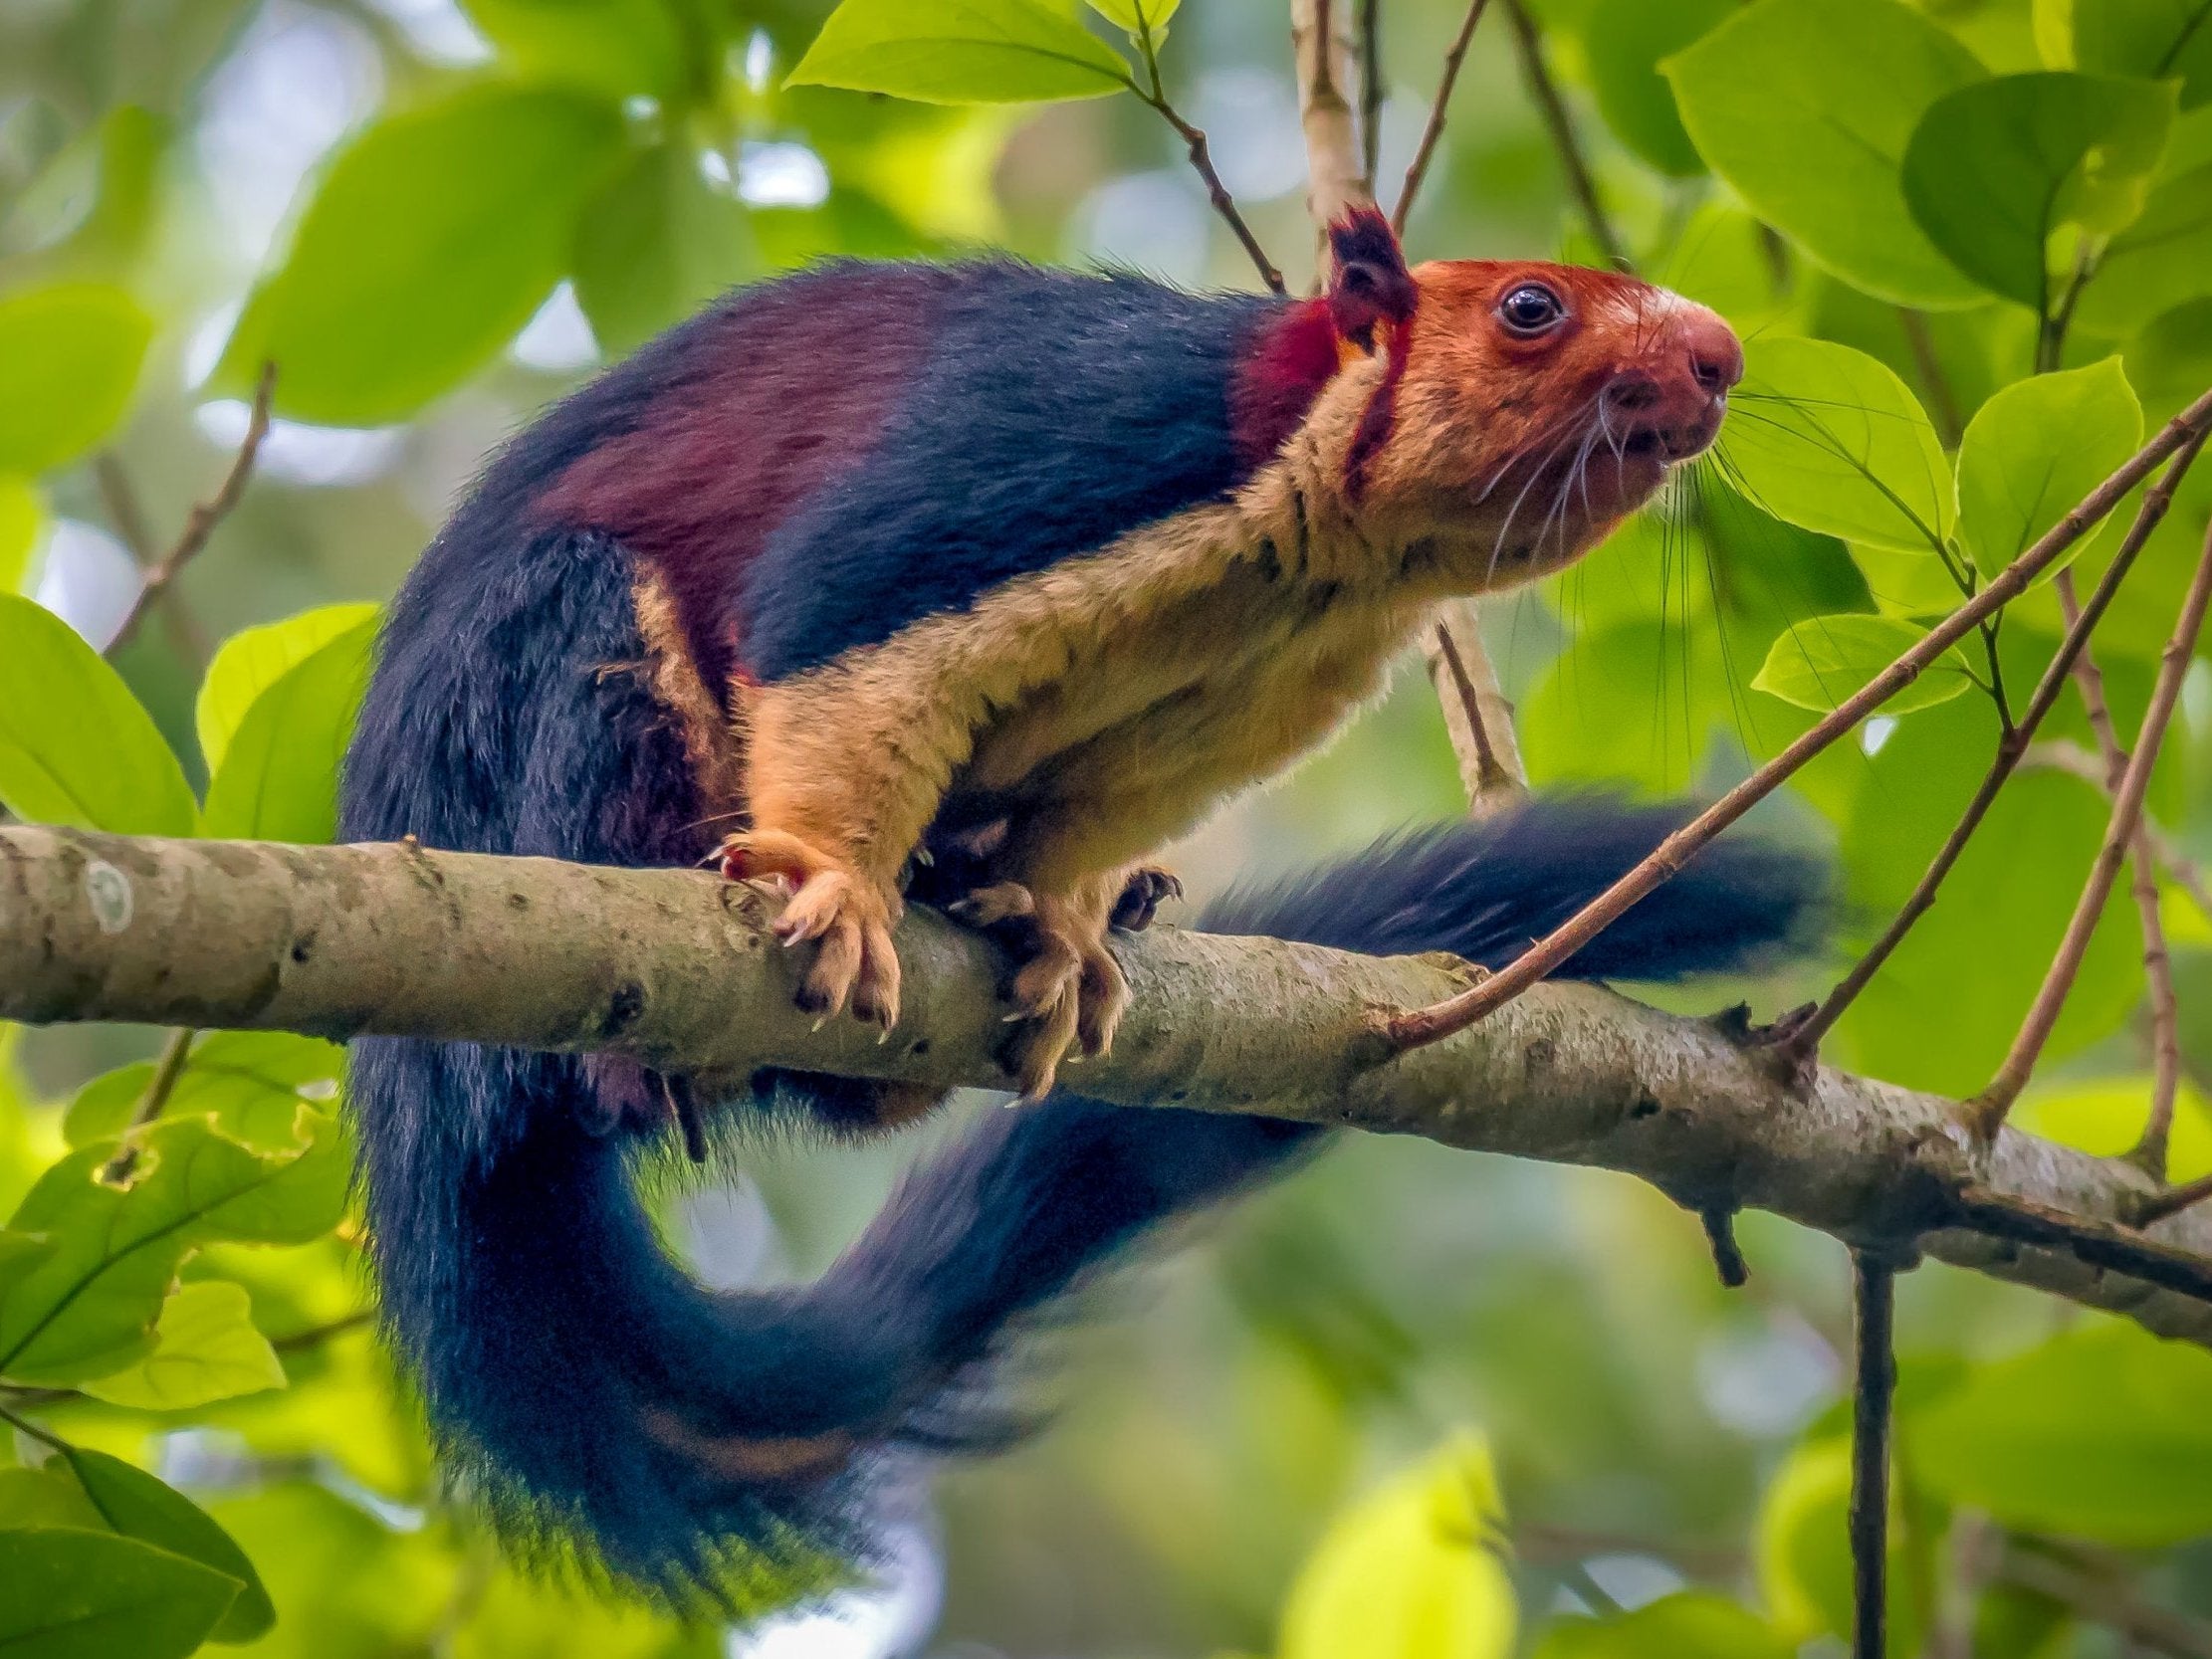 The multicoloured Malabar giant squirrel, which was spotted in a forest in the Pathanamthitta District of India.